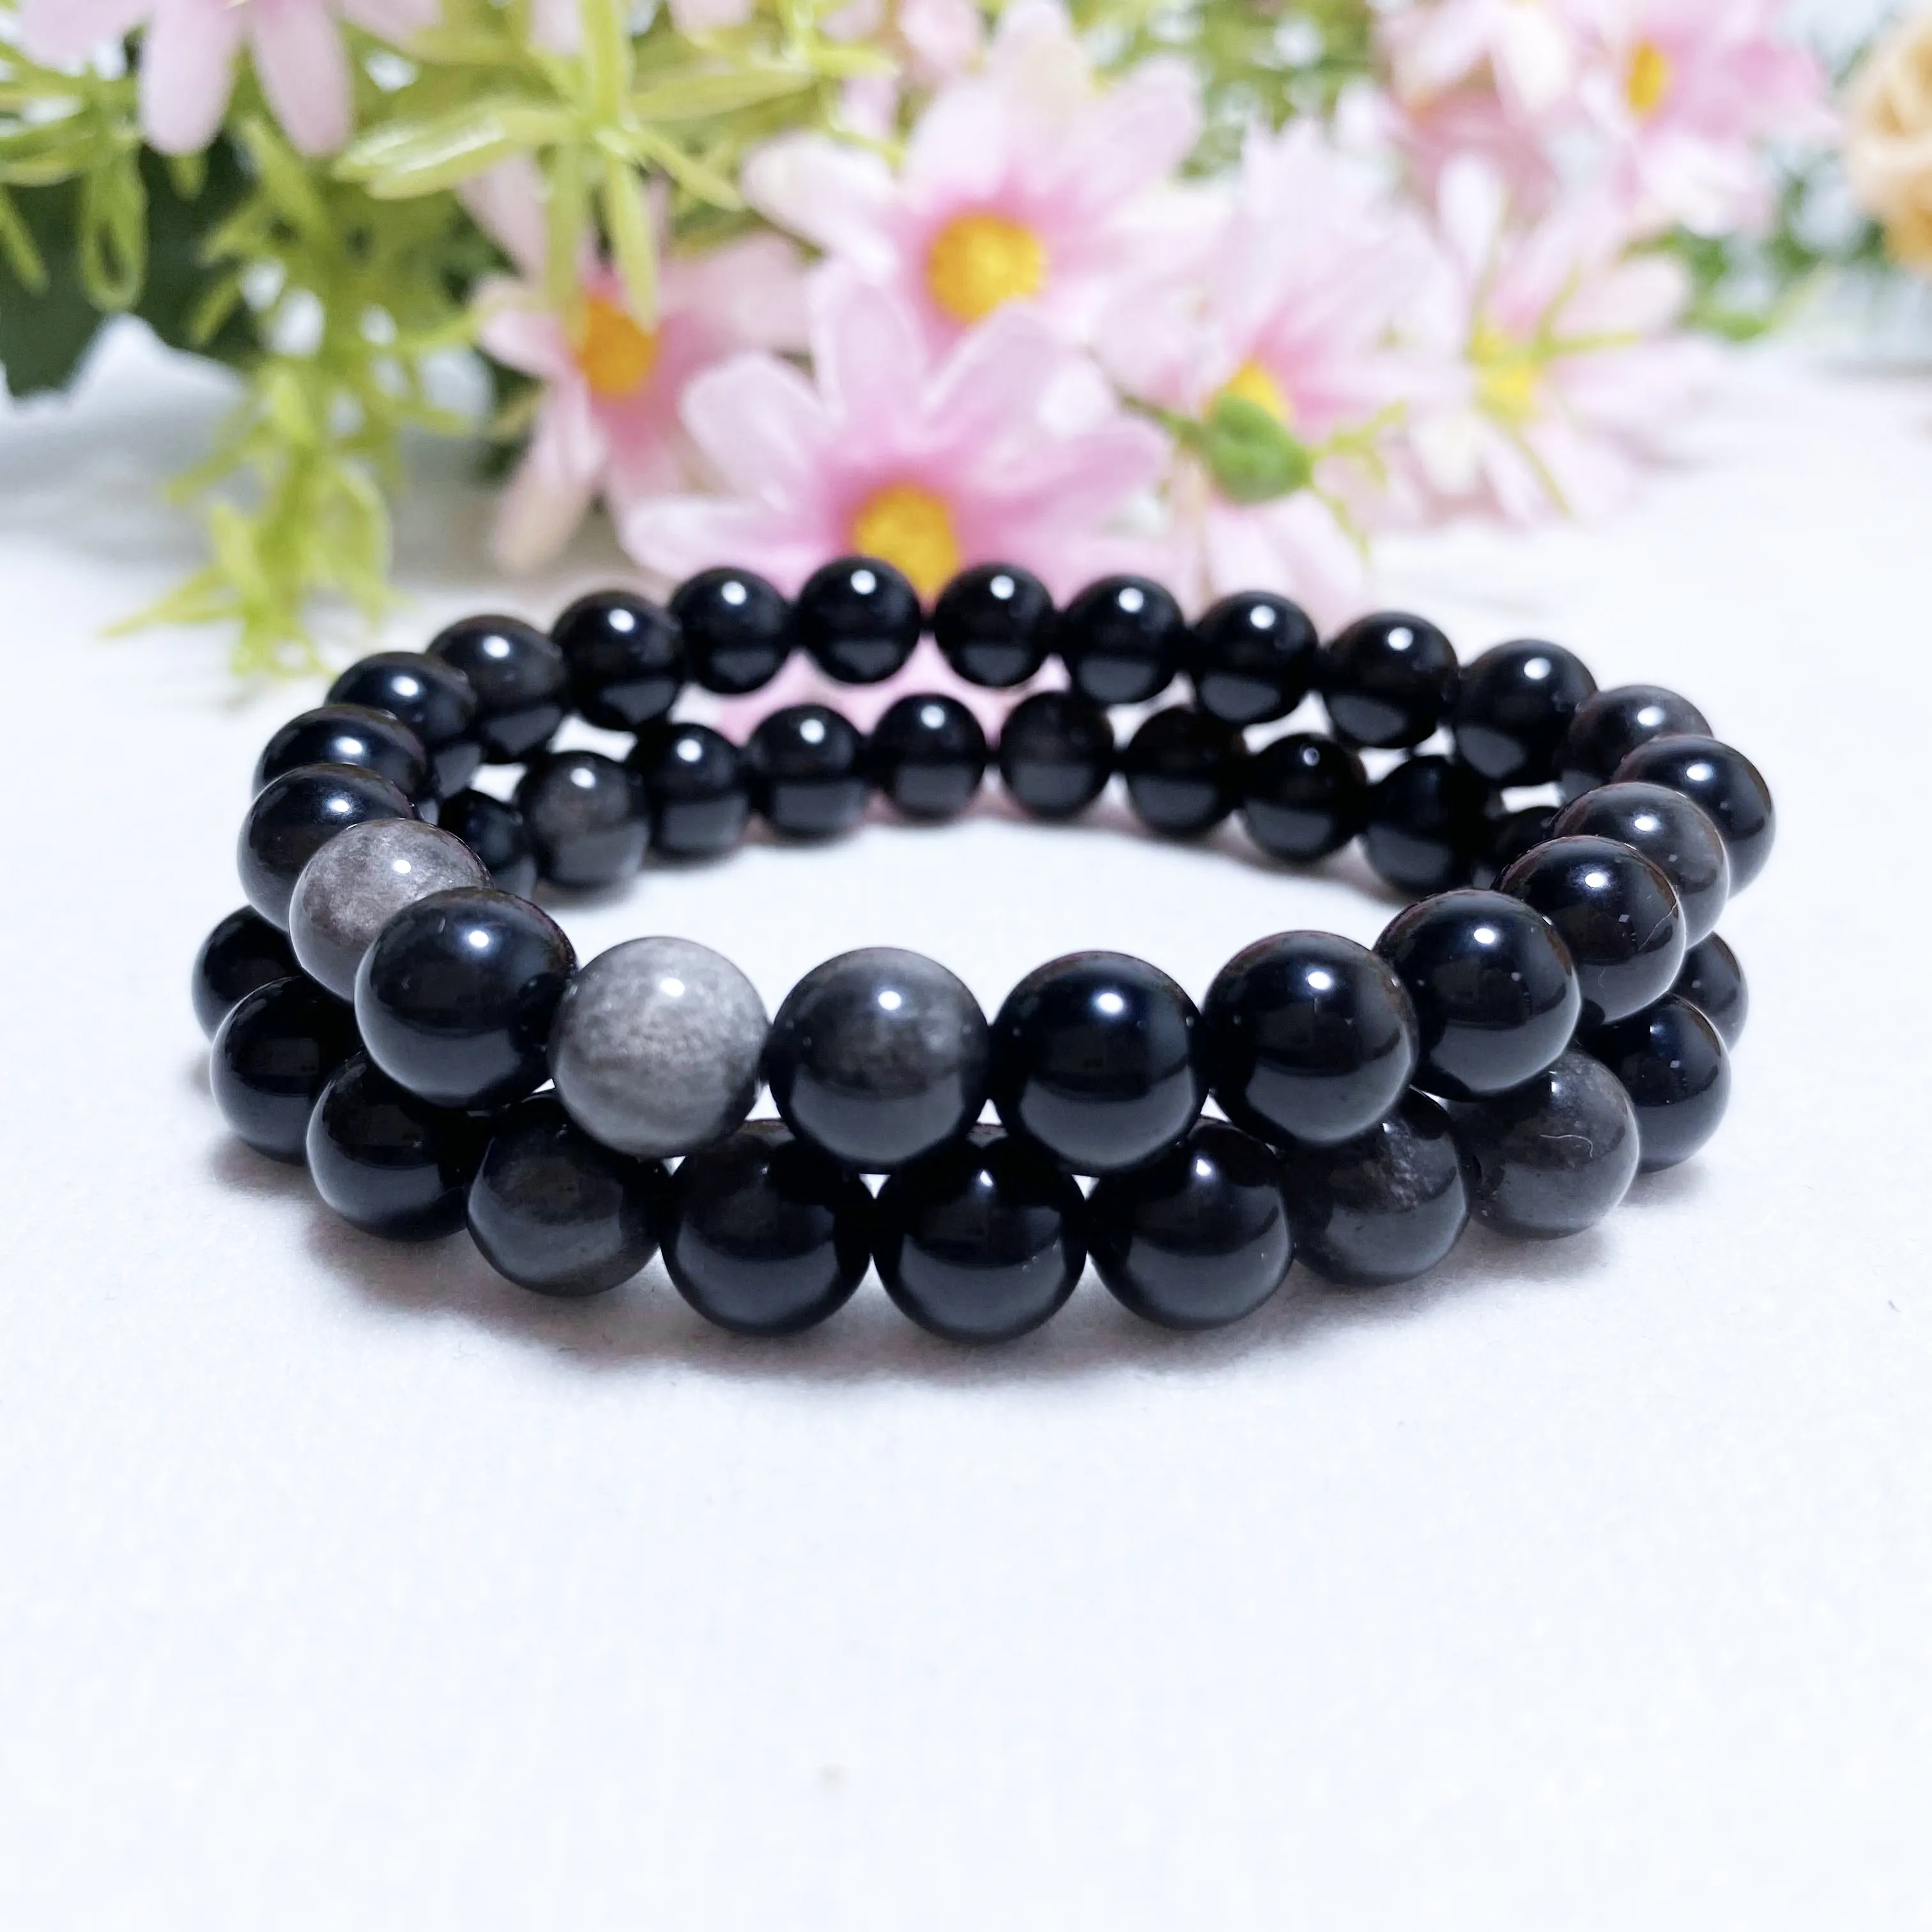 Precious Real Lucky Healing Natural 8mm Sliver Obsidian Crystal Stretch Stone Bead Bracelets For Women And Men